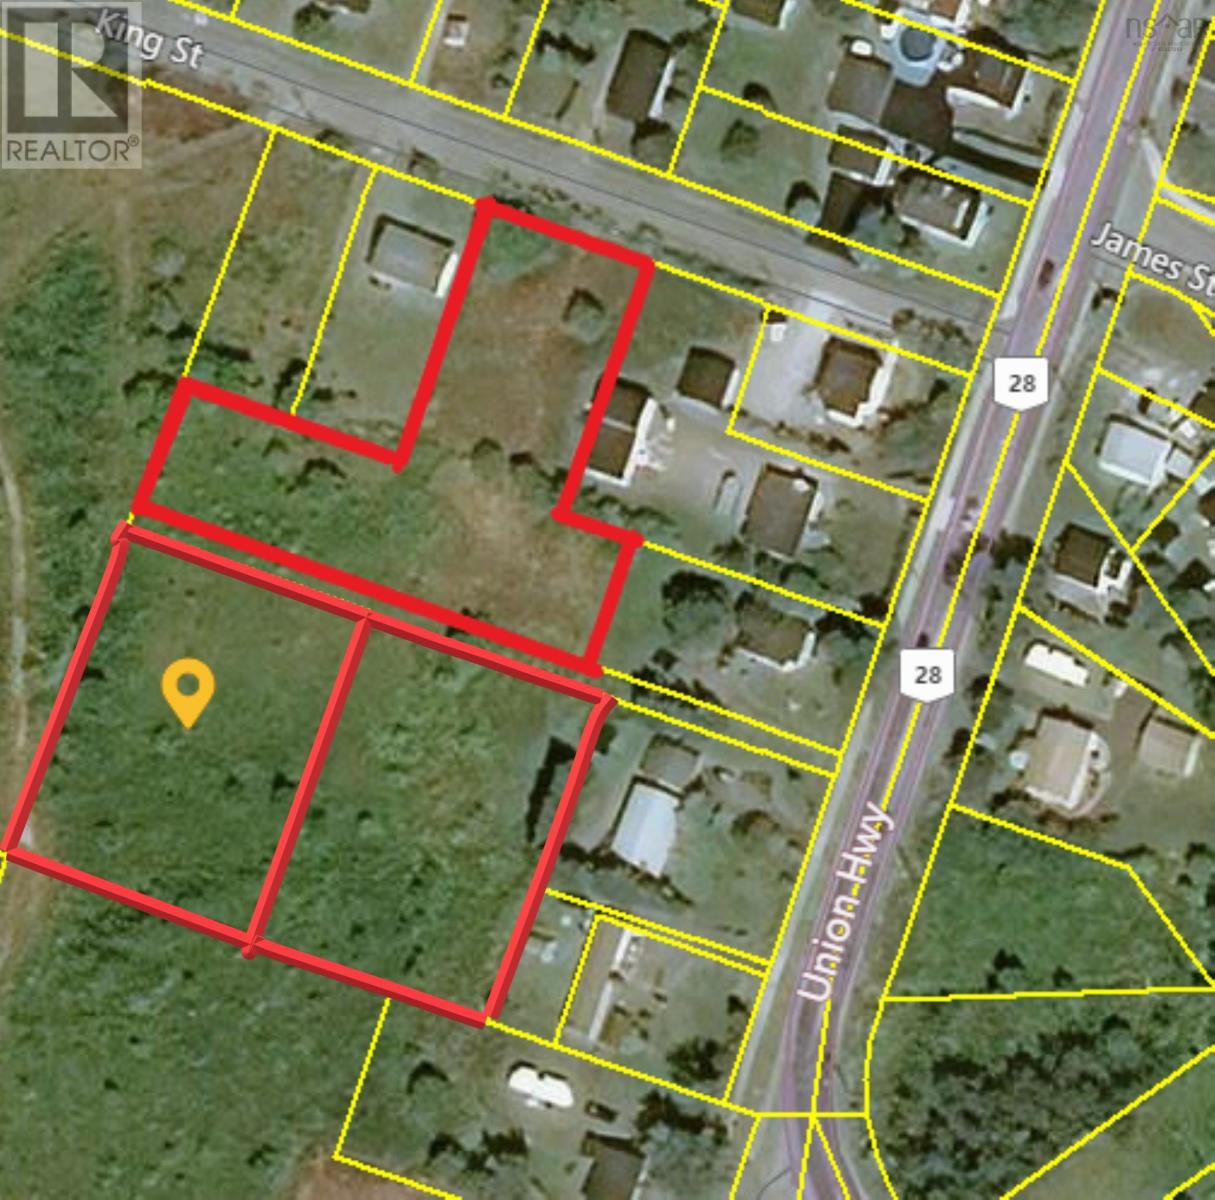 Vacant Land For Sale | King Street | Scotchtown | B1H1A8